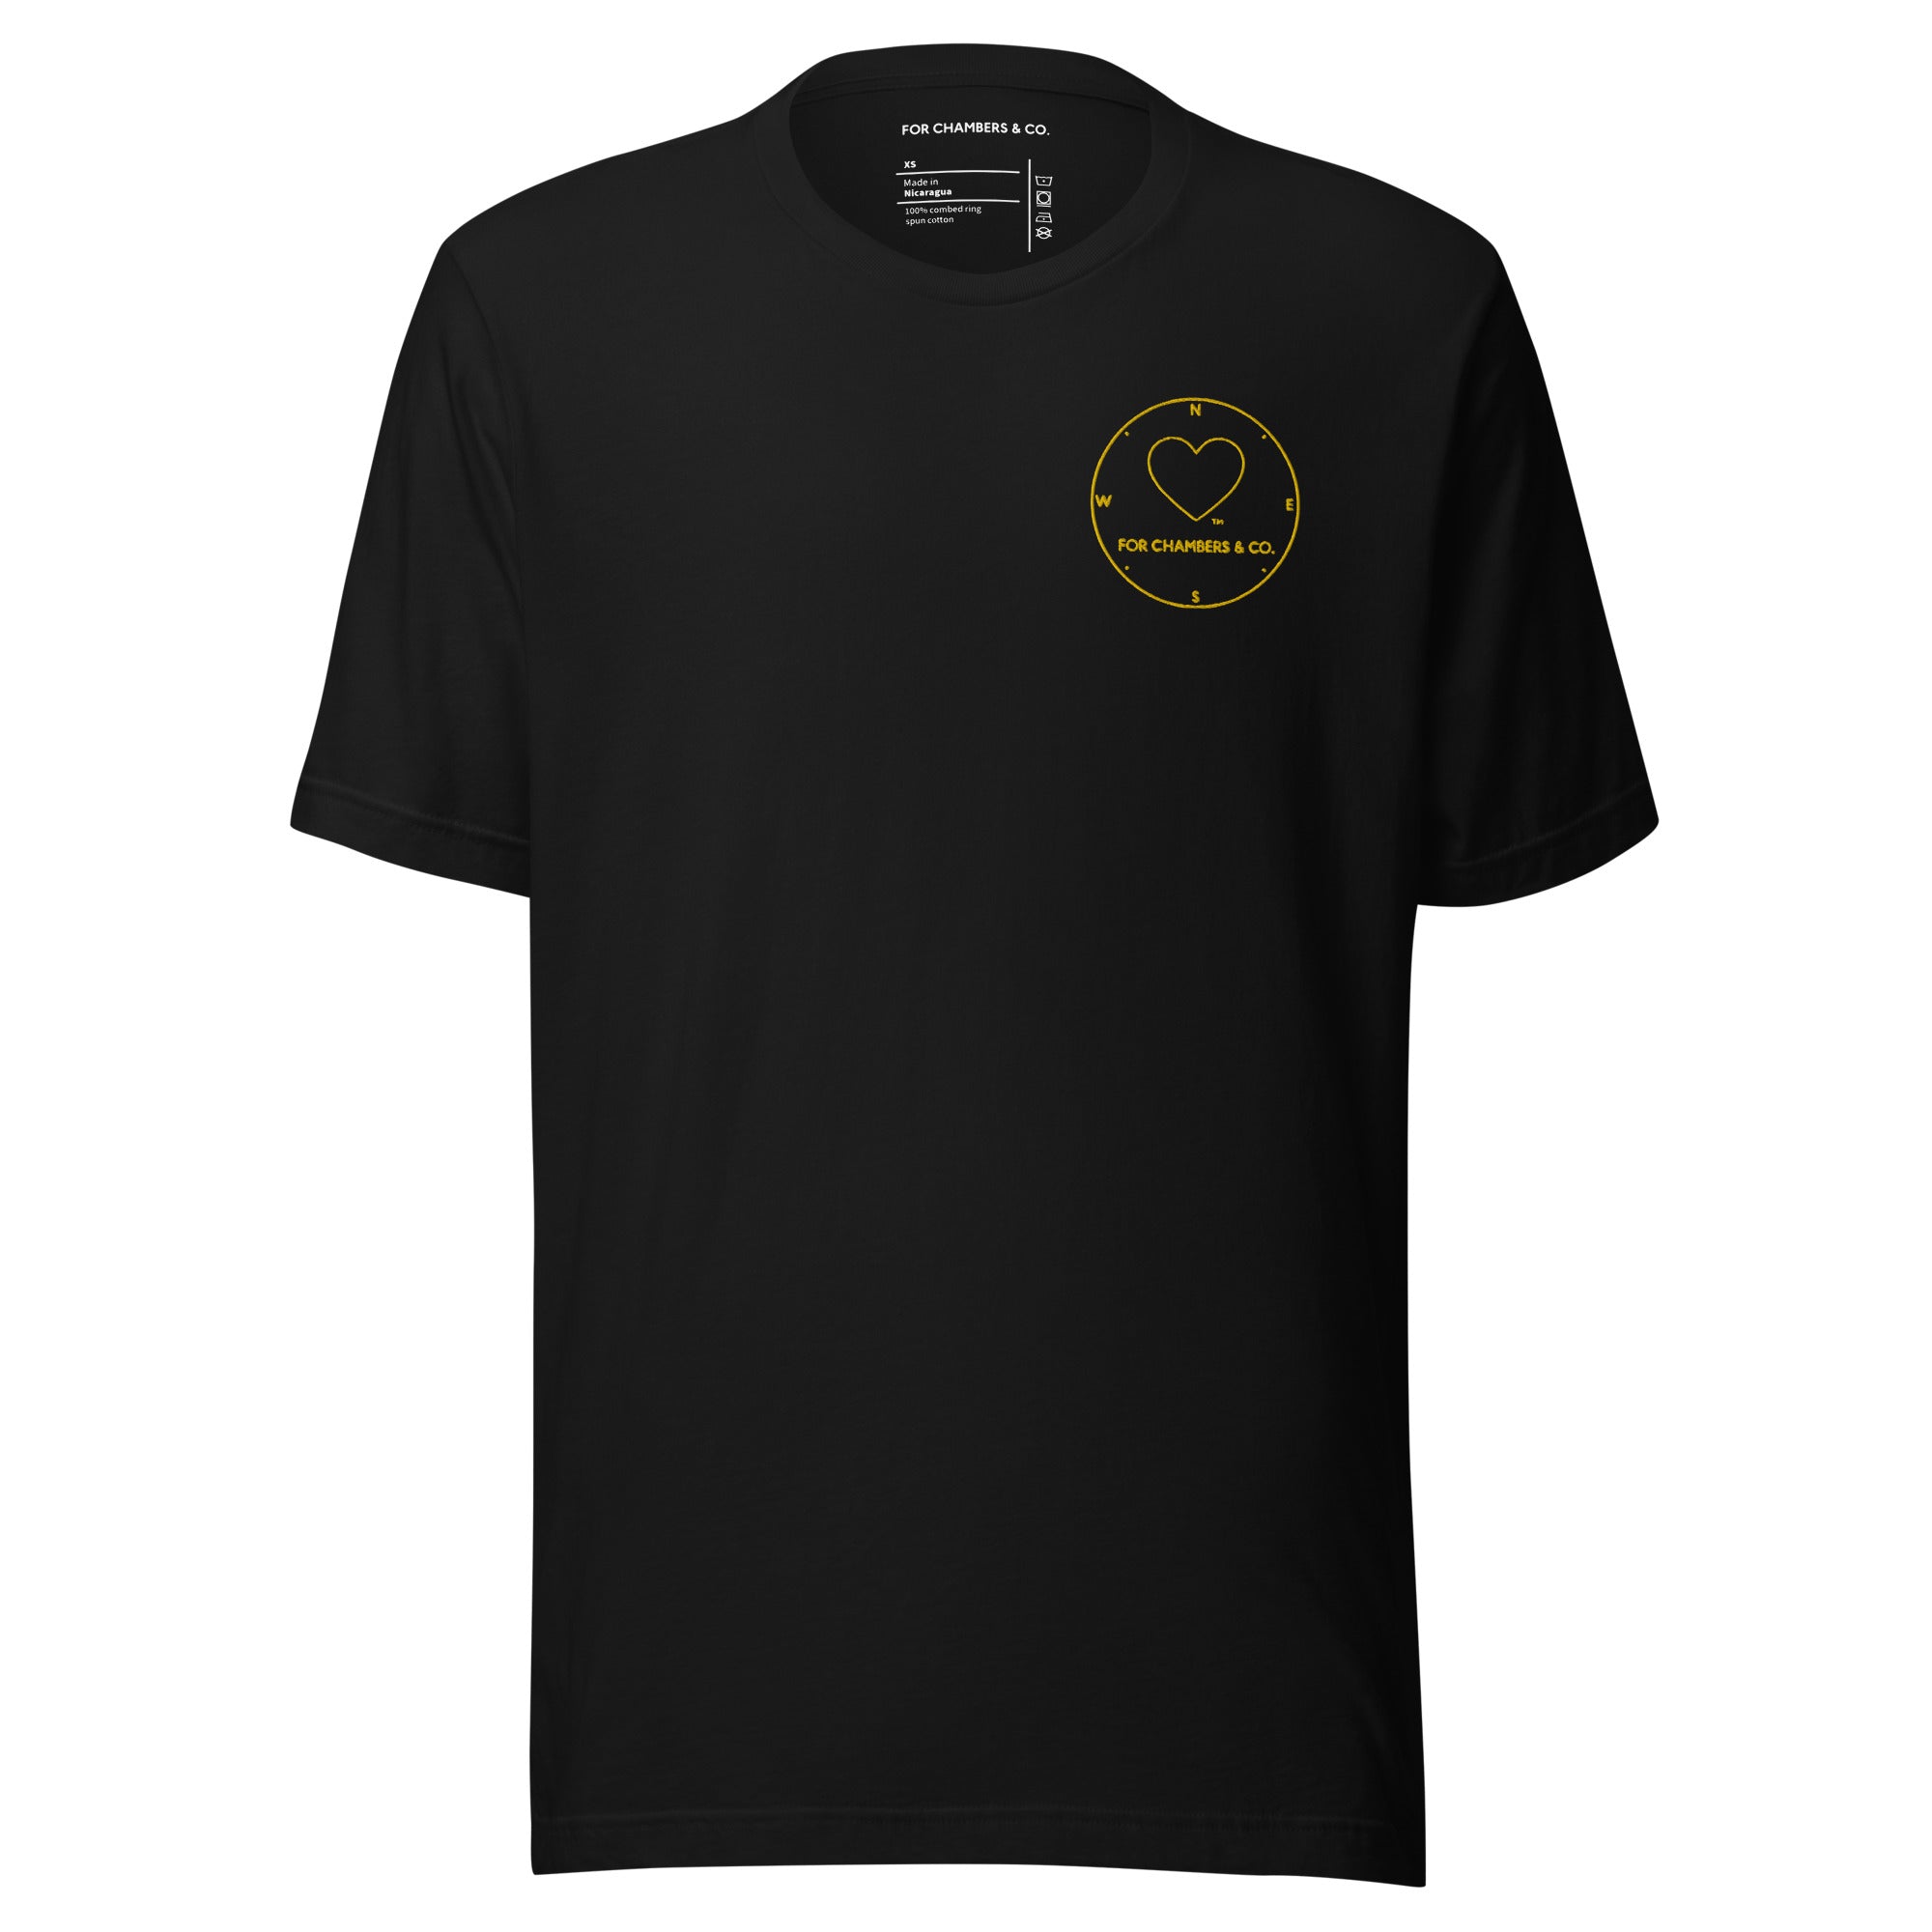 FOR CHAMBERS & CO. LOGO Shirt in Black